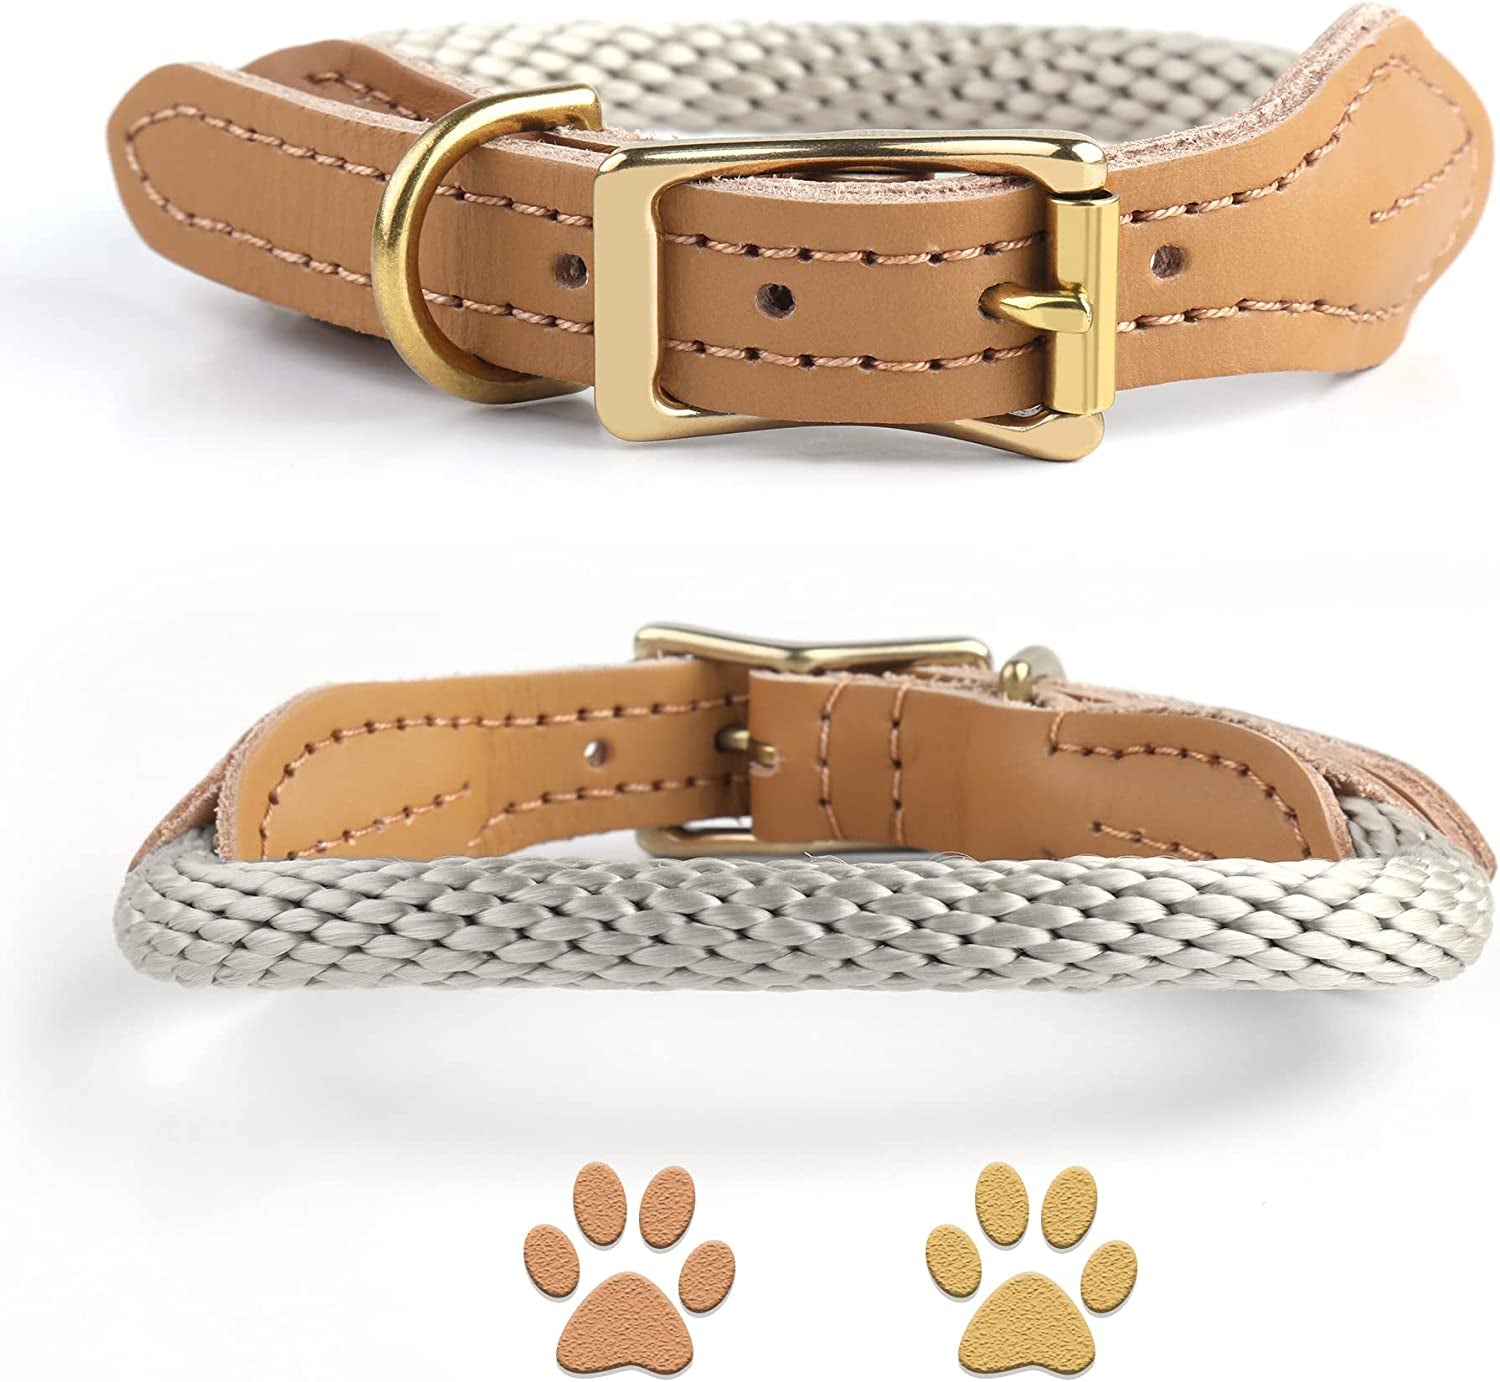 Decorbea Airtag Holder- Airtag Dog Collar Holder(2 Pack)- Dog Airtag Holder in Fashionable Design -PU Leather Pet Collar Case for Apple Airtags Electronics > GPS Accessories > GPS Cases Decorbea Light Brown Dog Collars (Pack of 1) Collar(S/M):11.8"-14.2" 